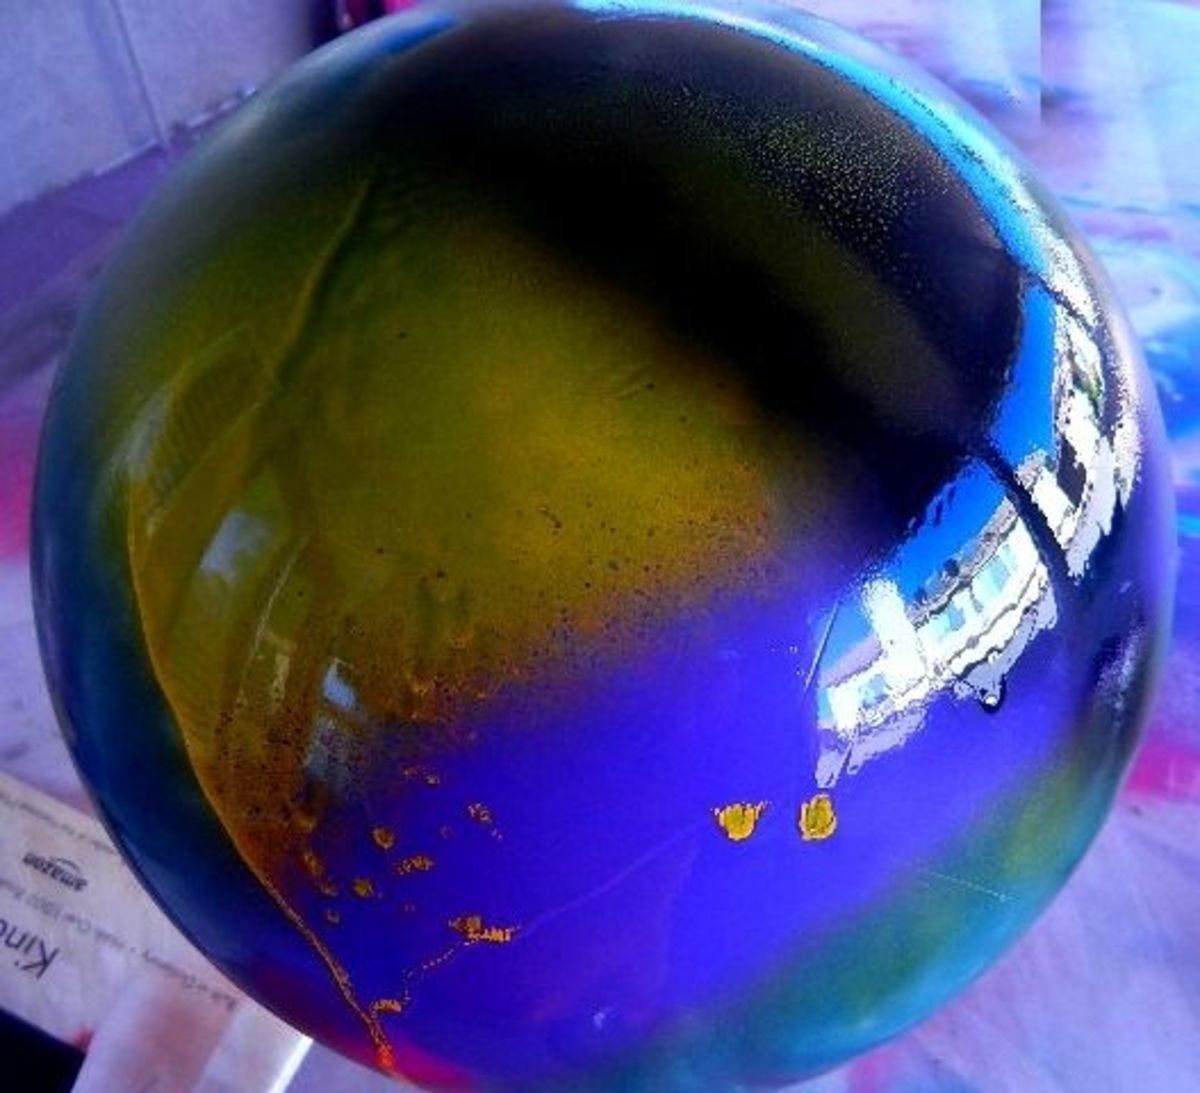 You'll need to apply several layers of paint to the bowling ball.